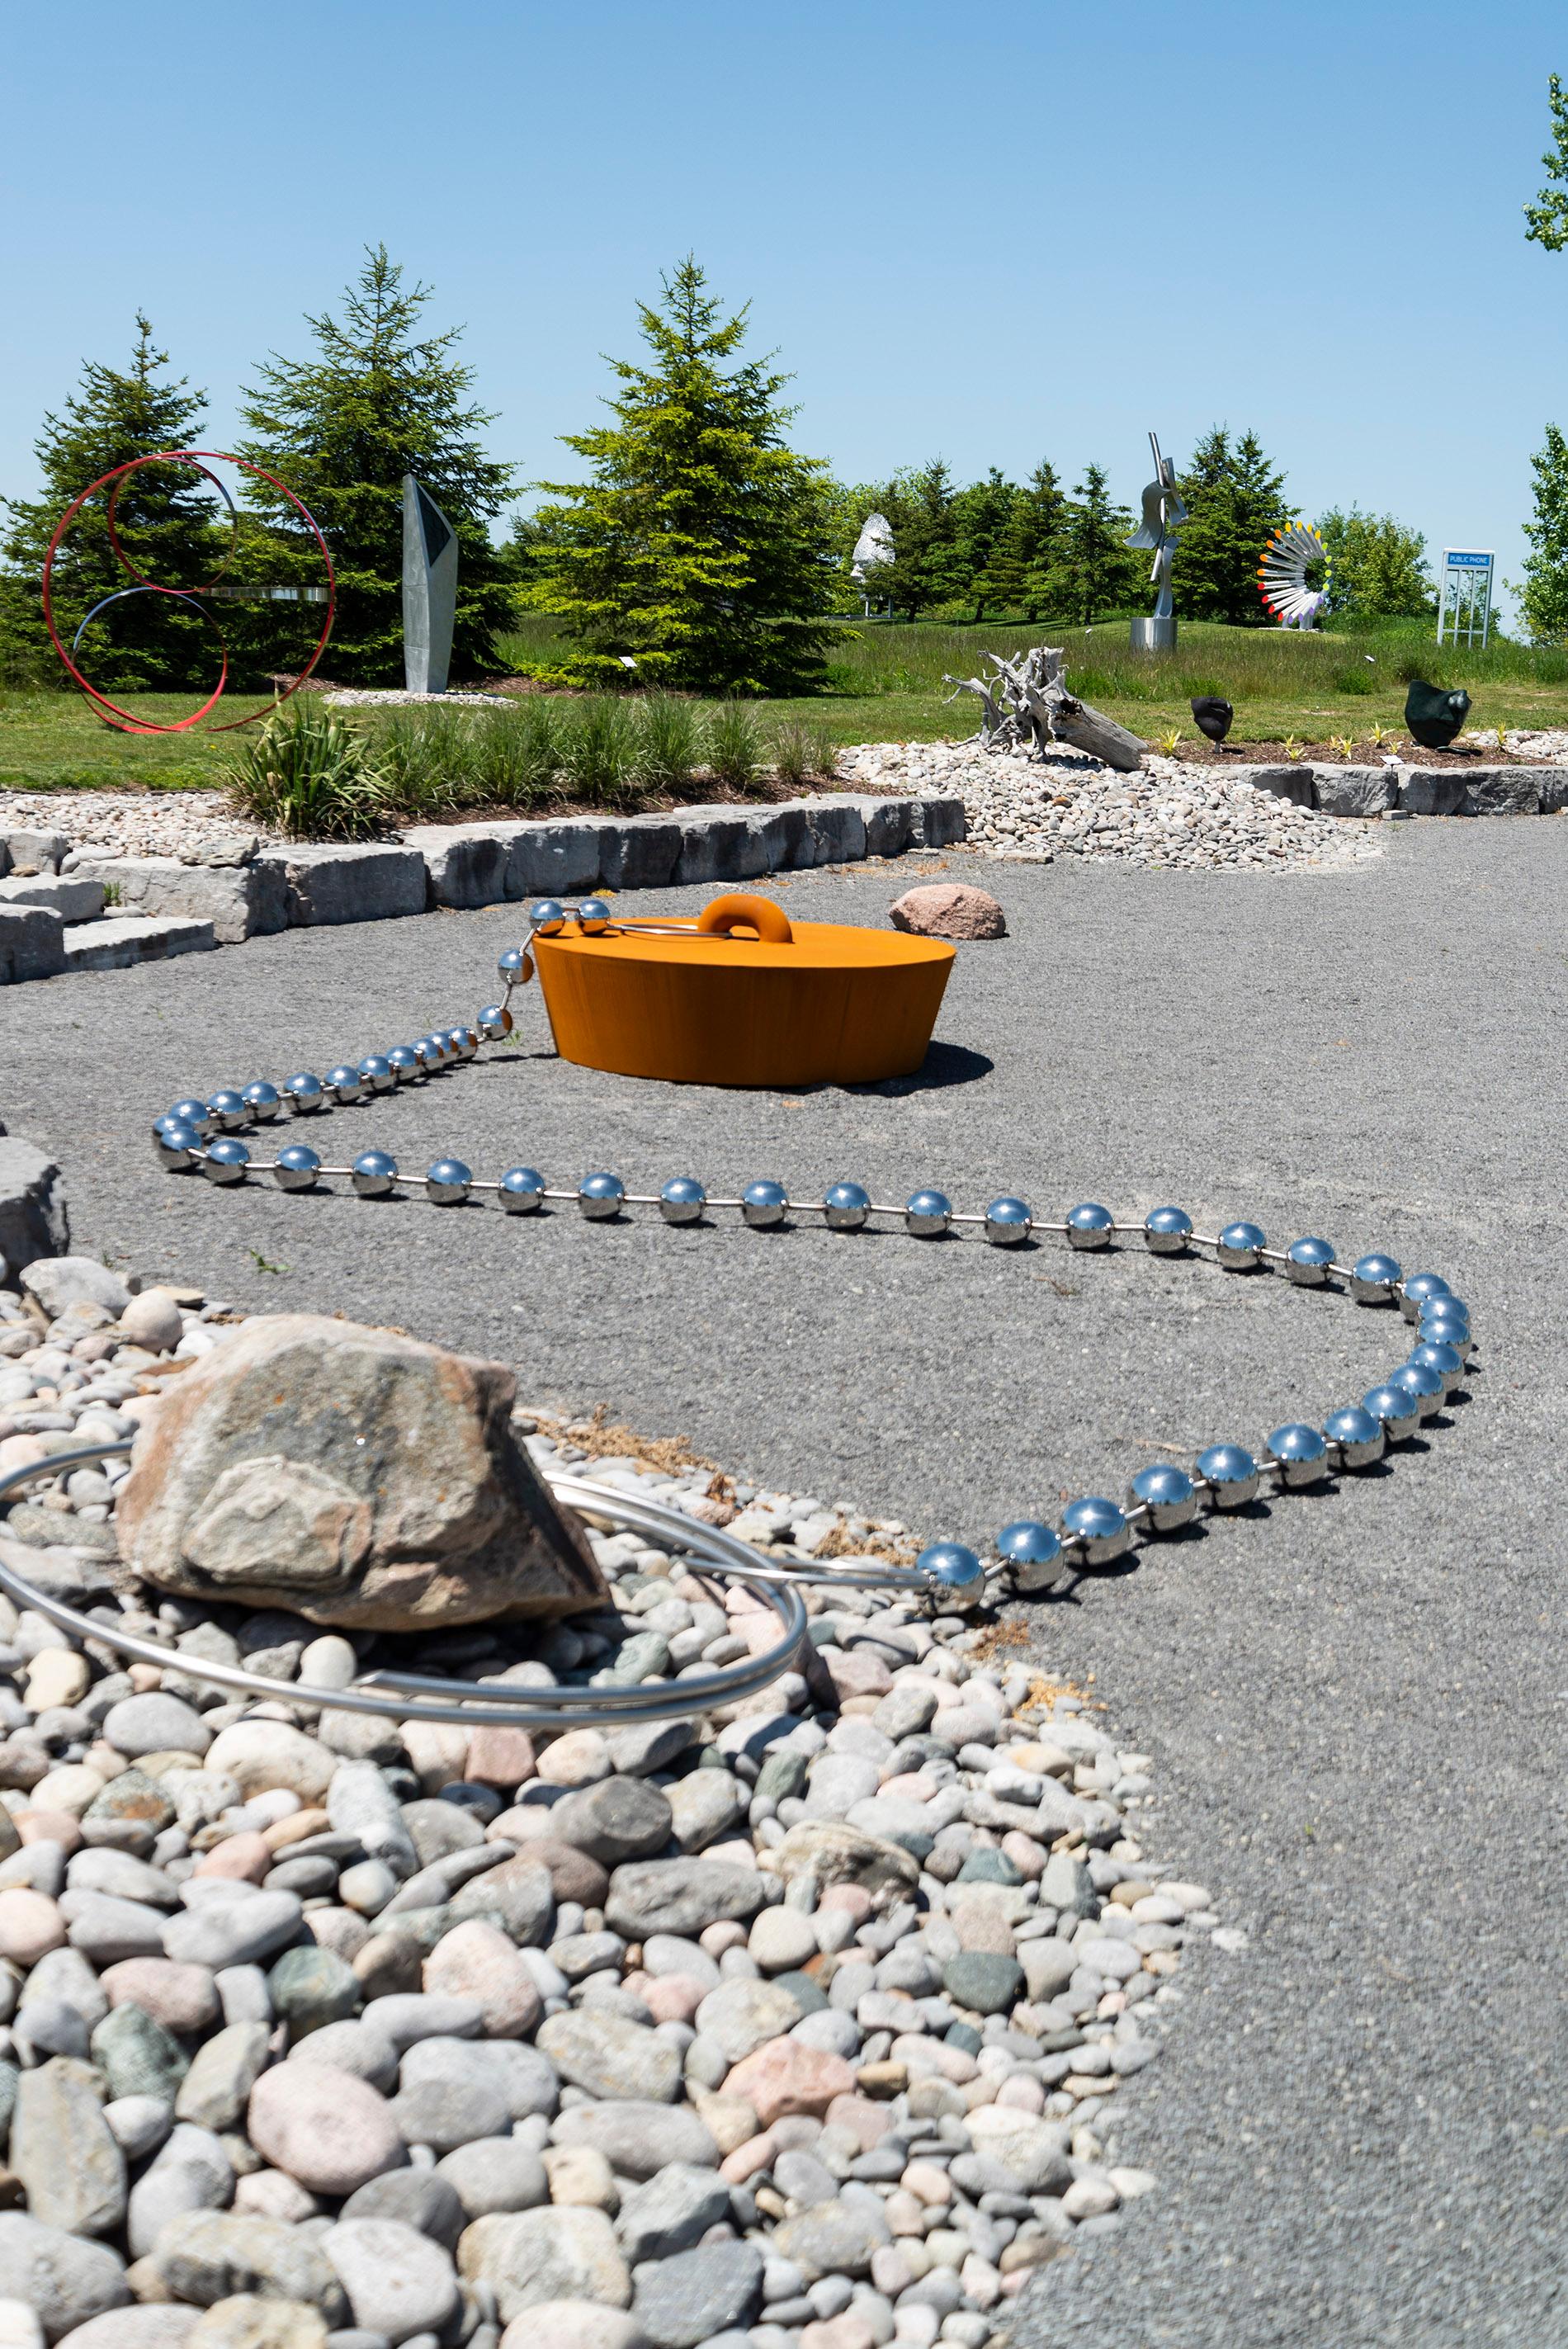 This fun and fanciful large outdoor pop art sculpture is by Floyd Elzinga. This piece is a massive corten steel drain plug attached to a long polished stainless chain. The form is obviously inspired by the old-fashioned rubber sink/tub stoppers. The